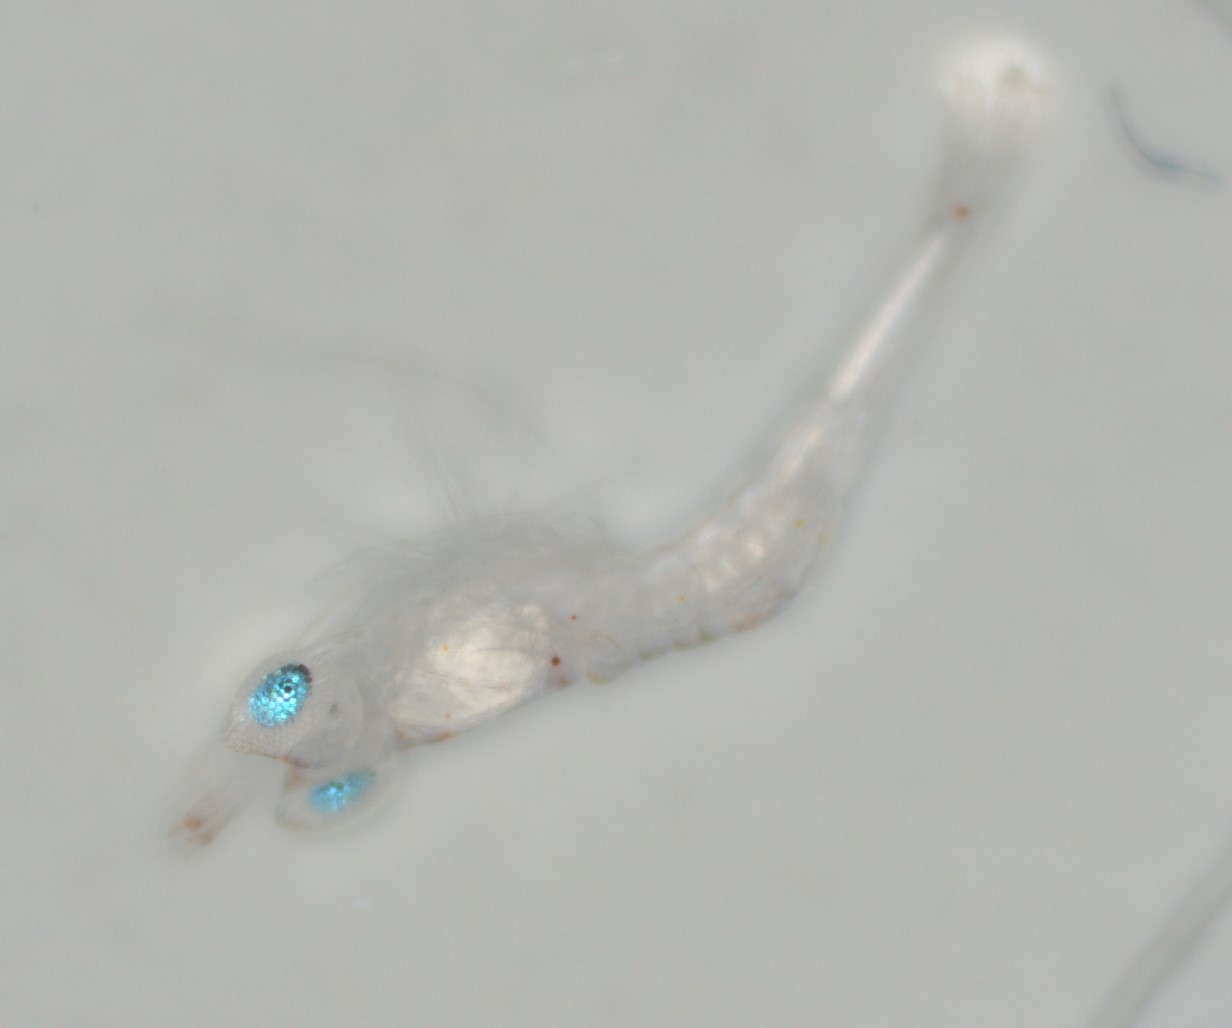 Read more about the article Revealing the Wonders of Nature’s Camouflage: Dr. Derya Akkaynak’s Breakthrough Study on Crustacean Larvae Eyeshine in Science Magazine